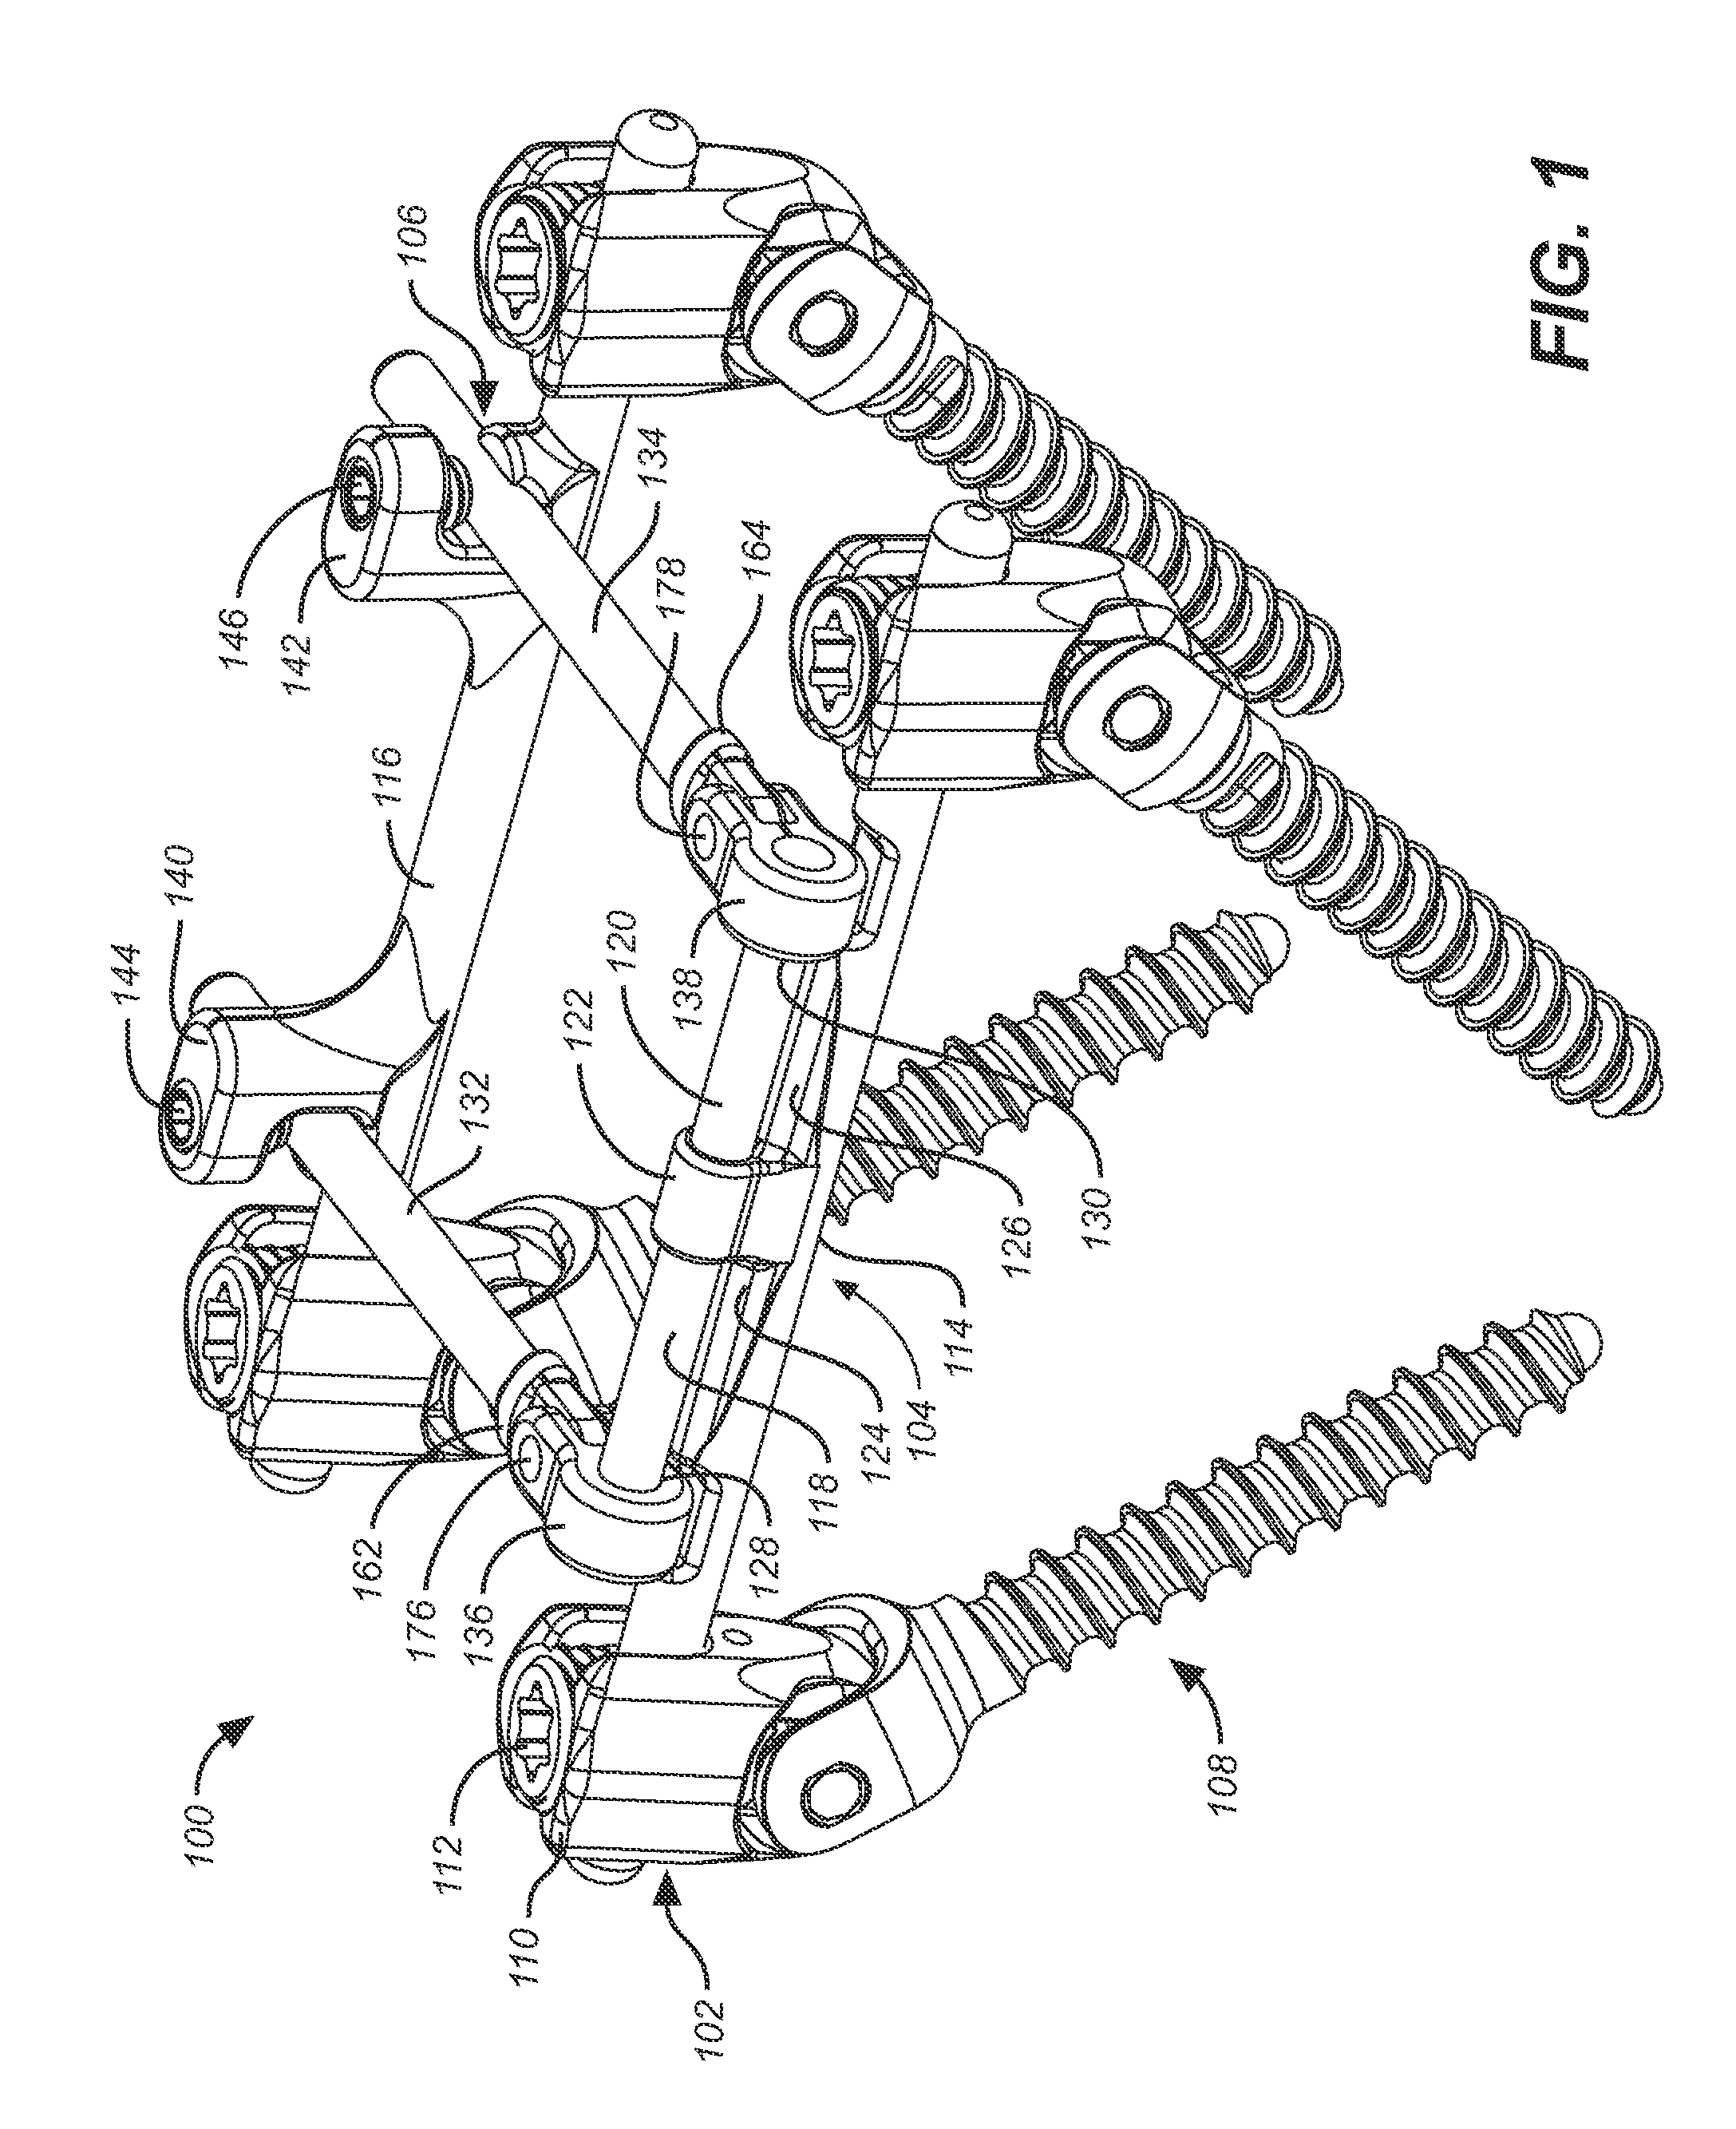 Reinforced bone anchor for a dynamic stabilization and motion preservation spinal implantation system and method